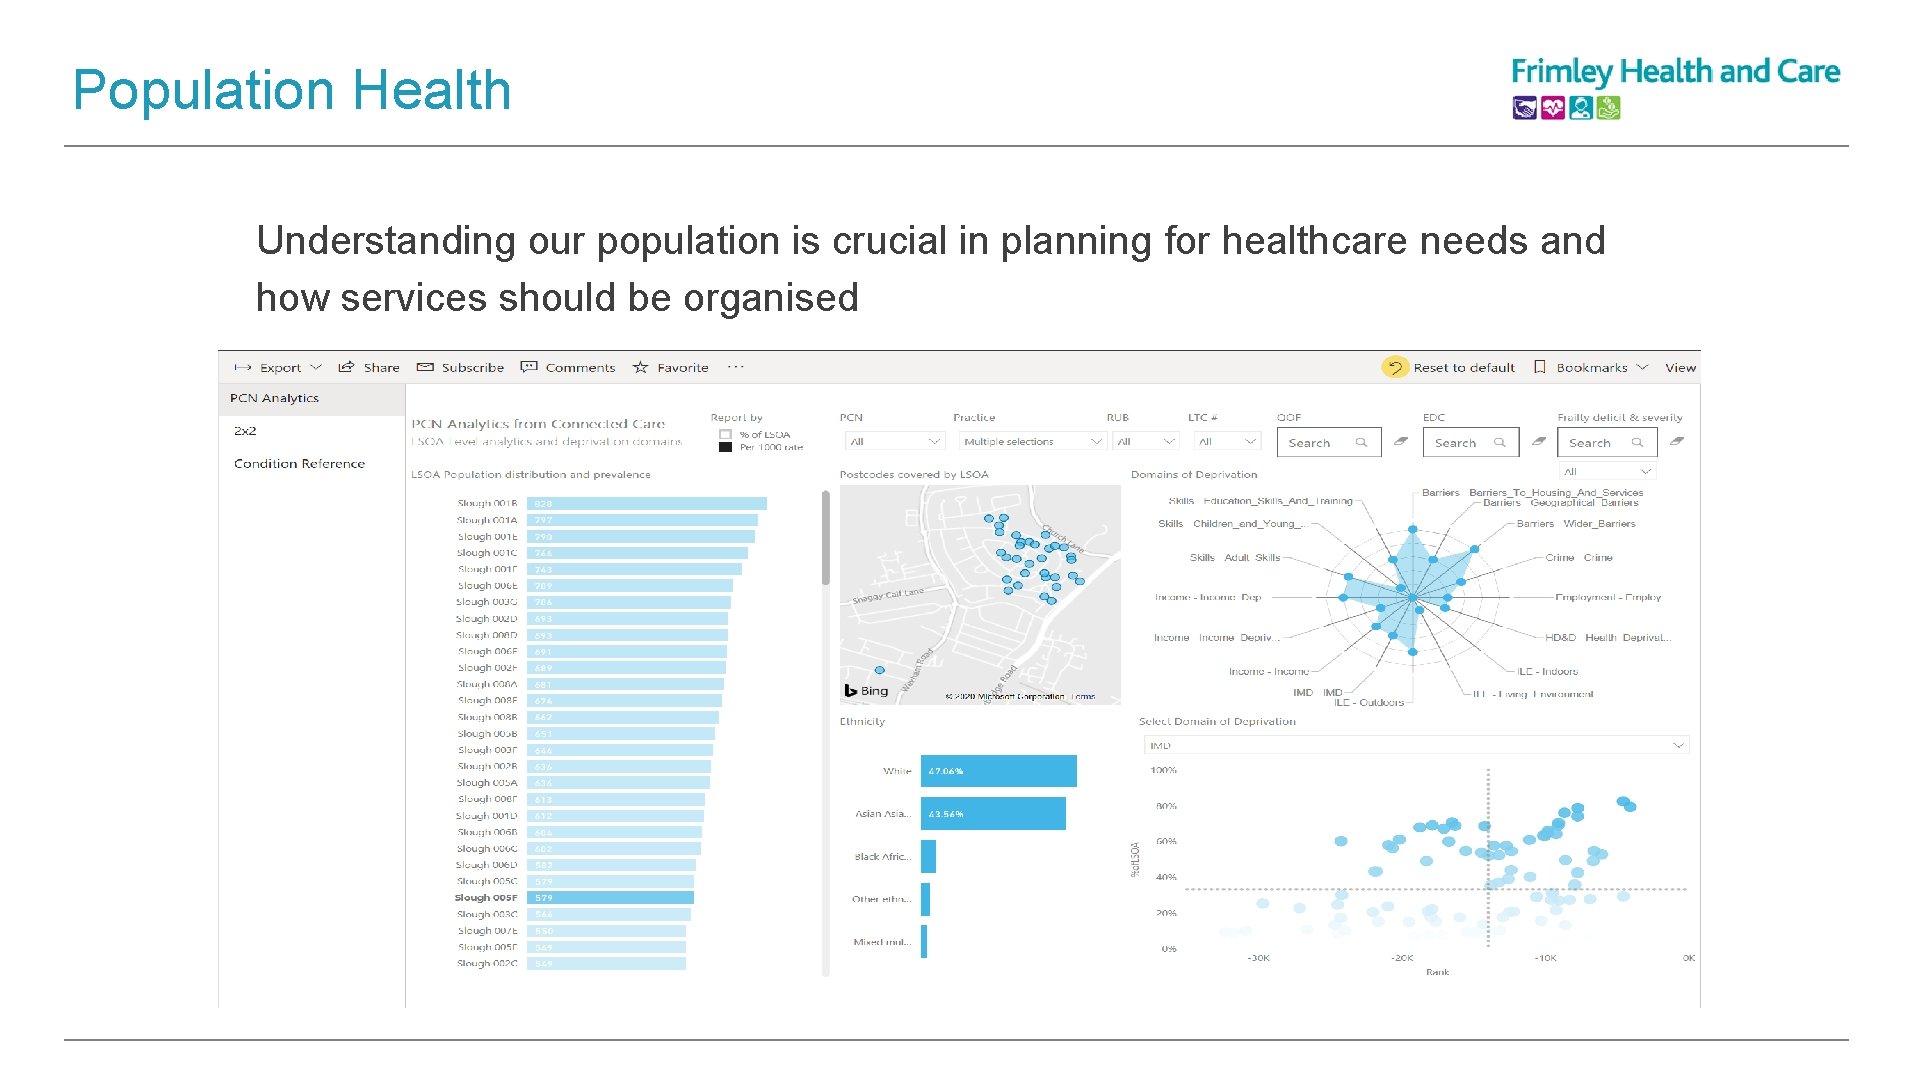 Population Health Understanding our population is crucial in planning for healthcare needs and how